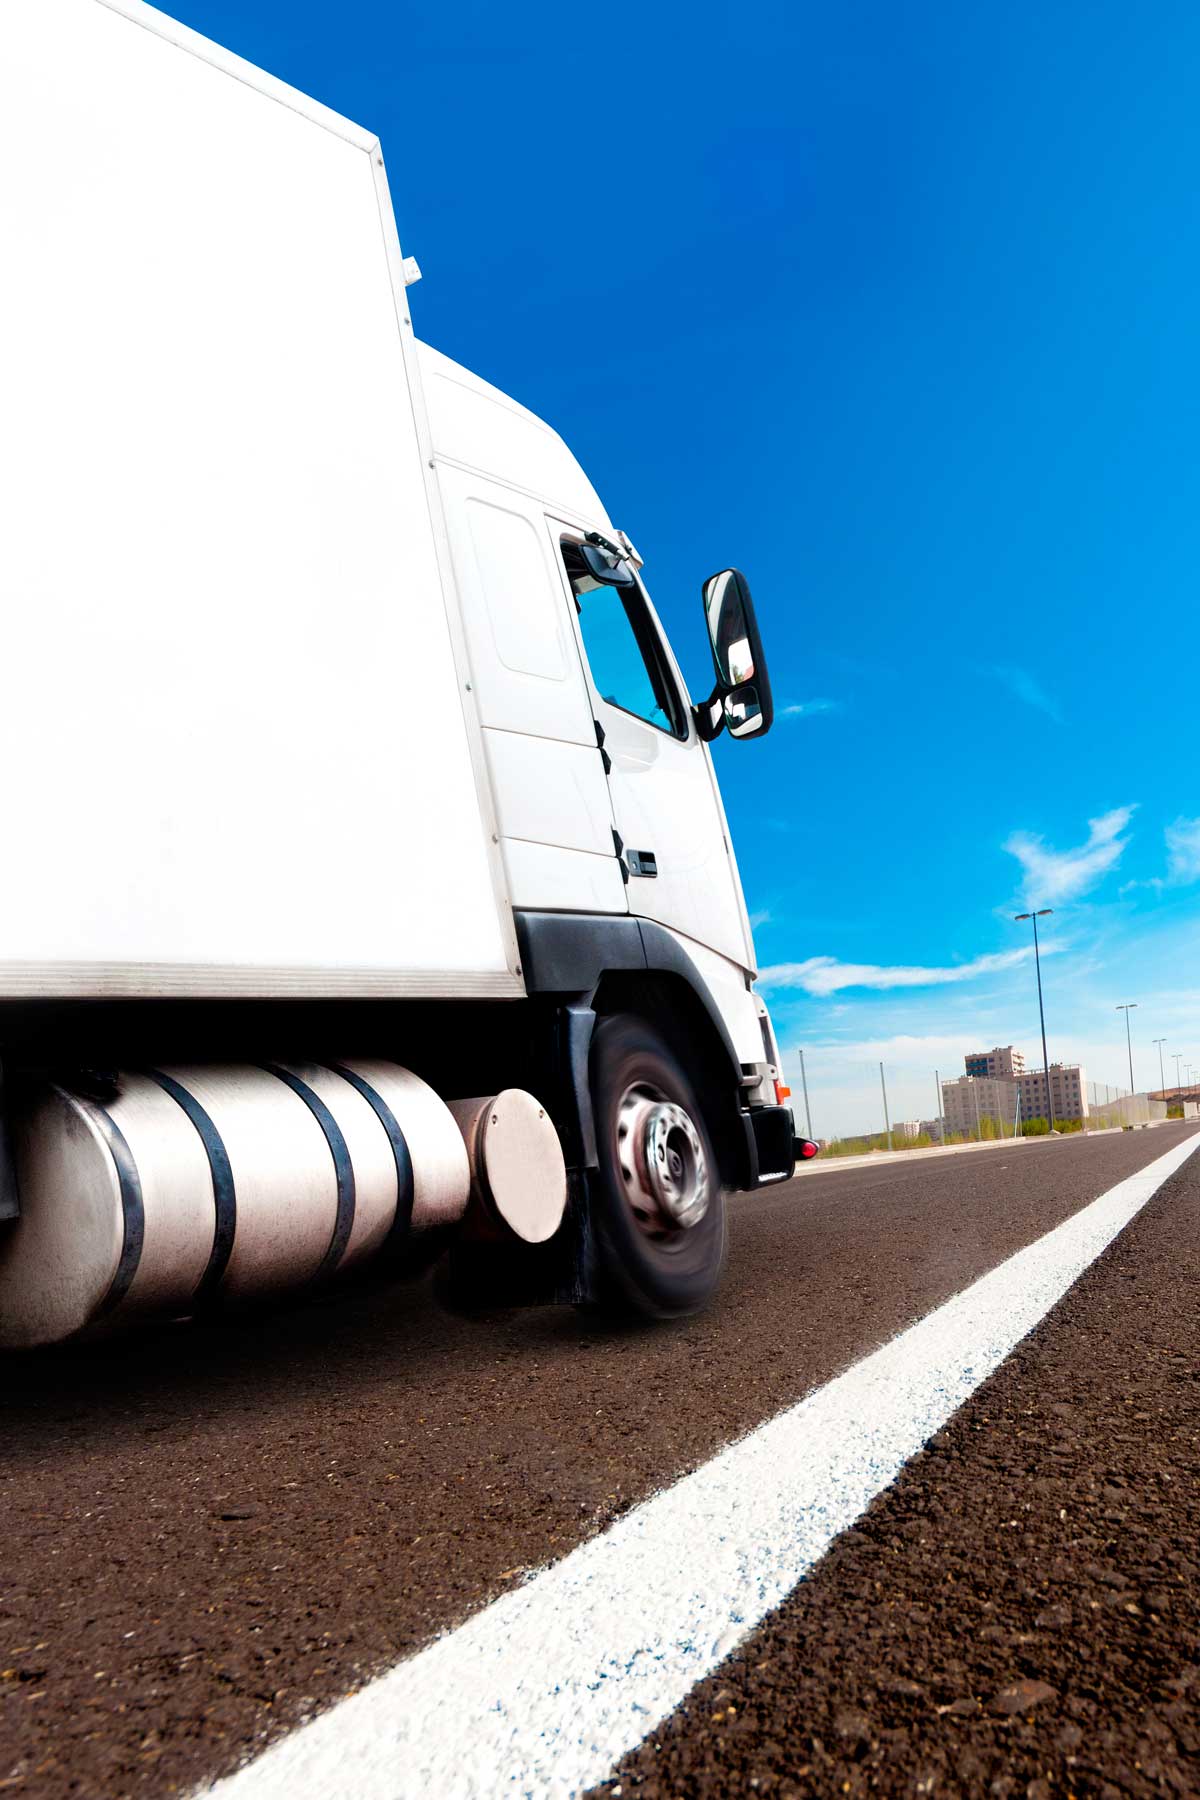 Looking for Long Term Commercial Vehicle Rental?